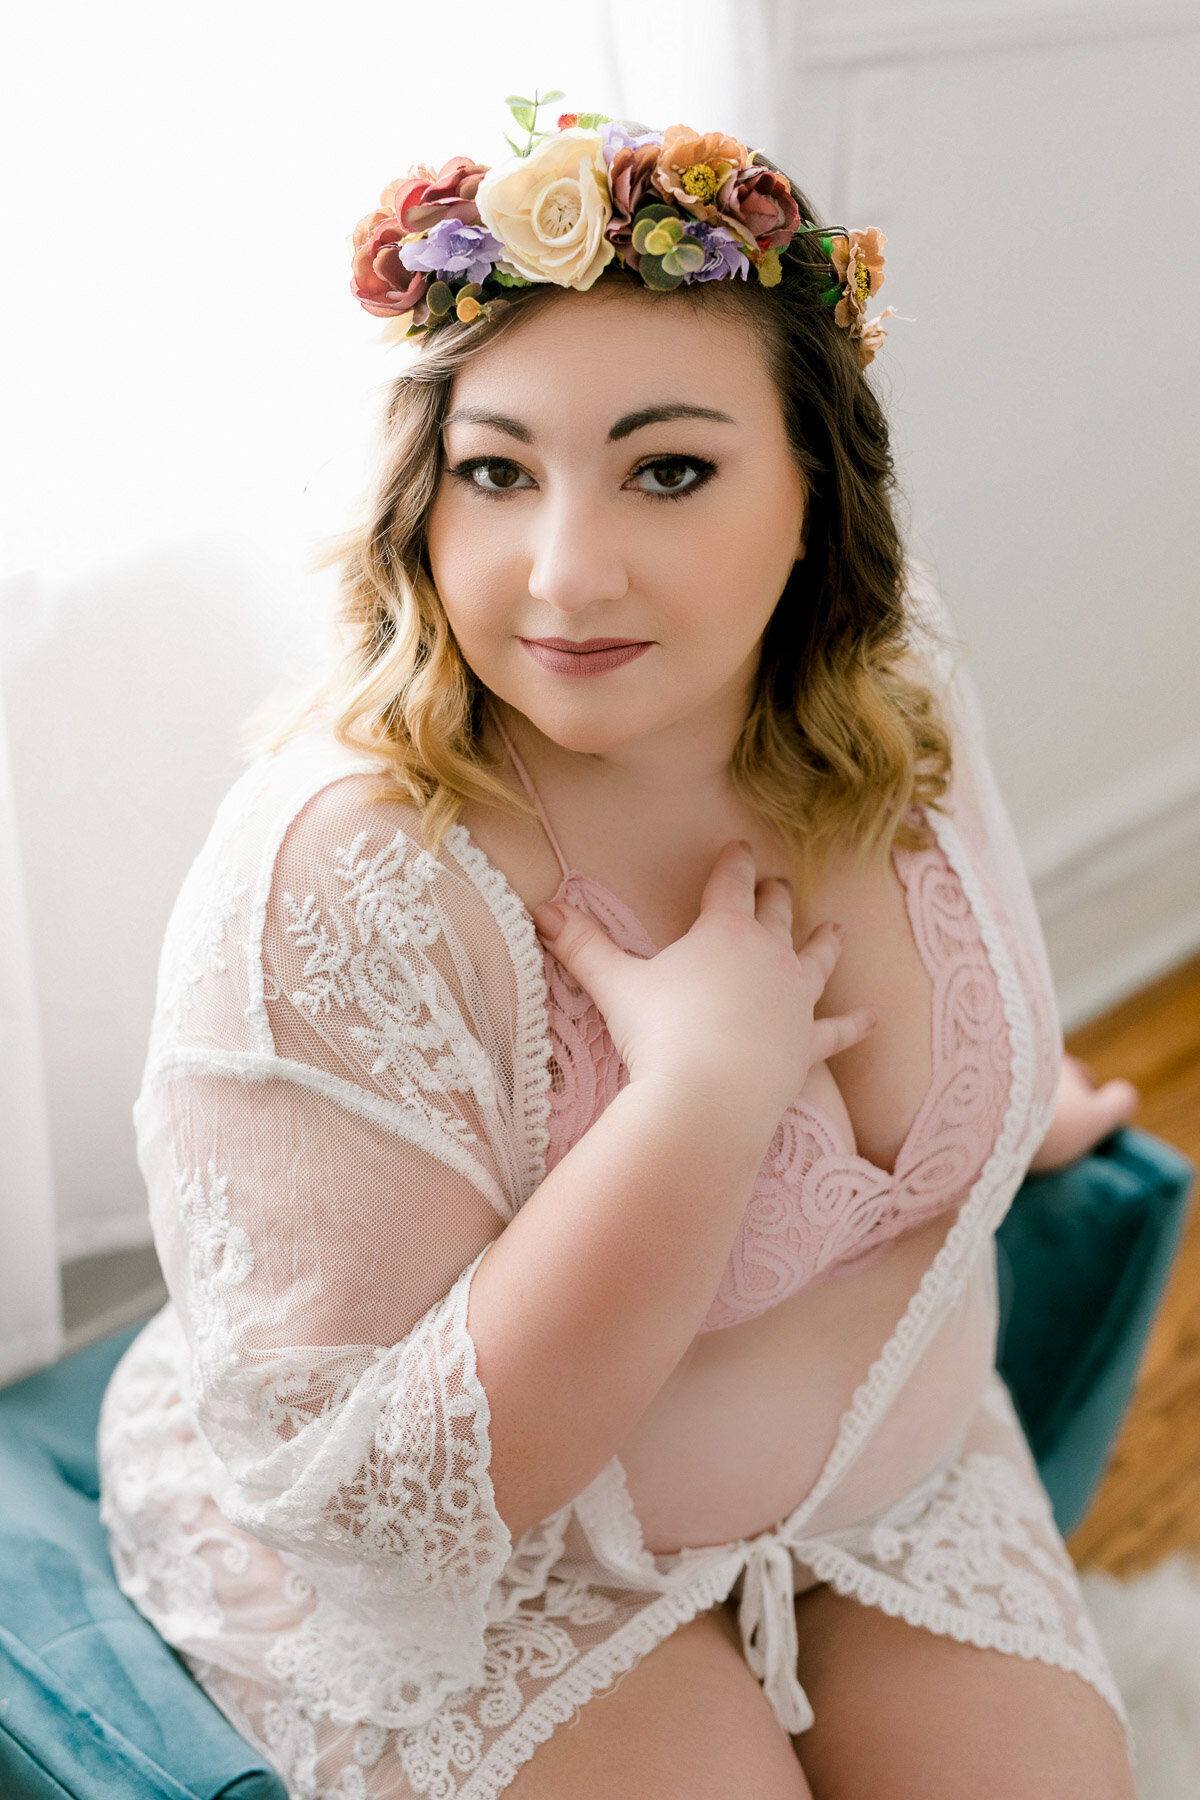 white lace lingerie and flower crown on woman